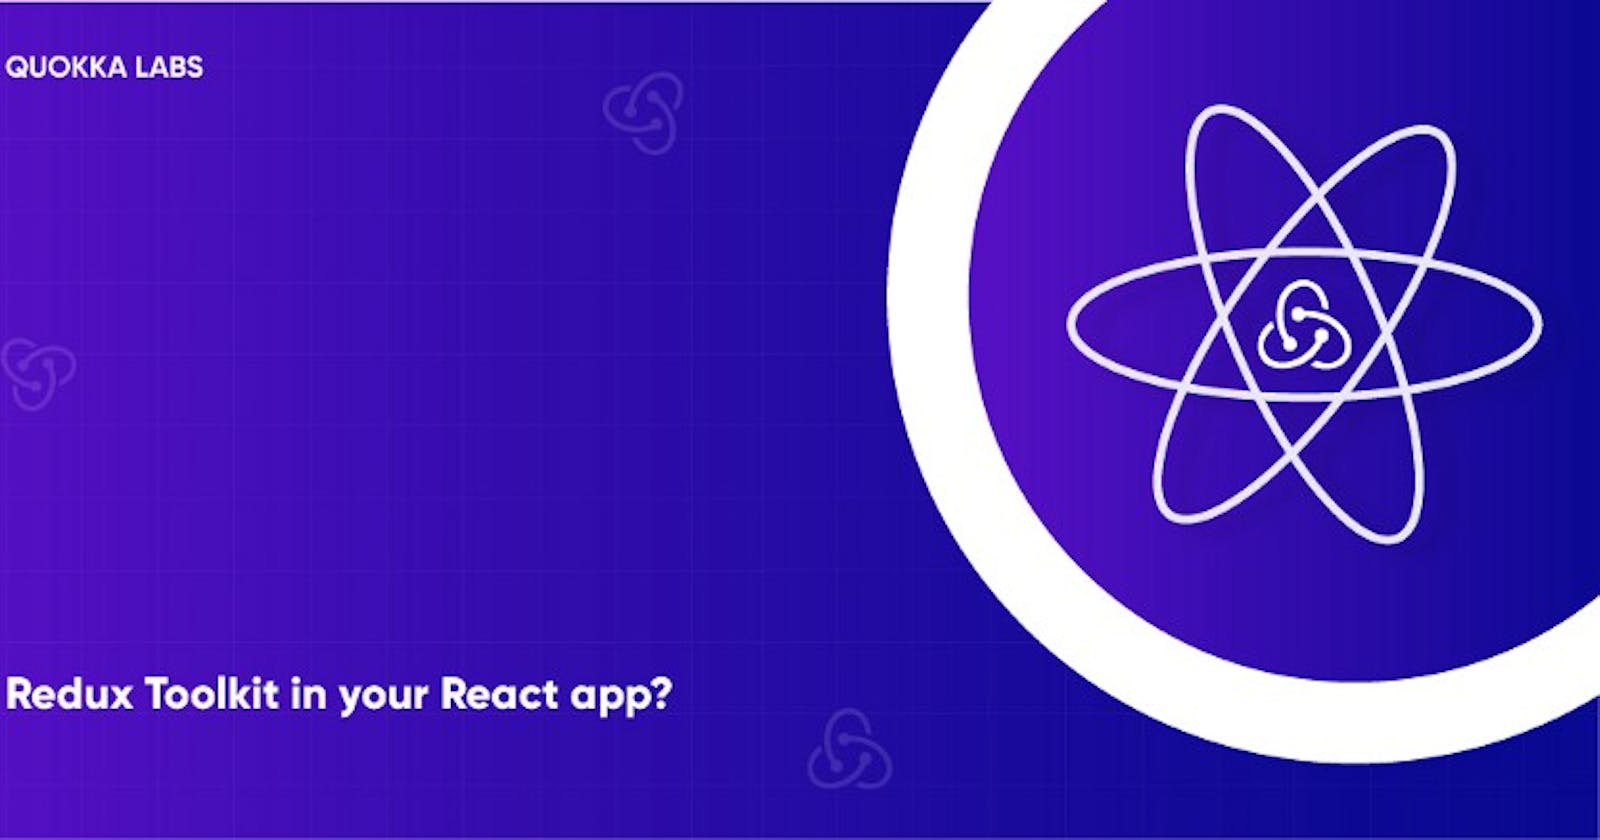 How to set up the Redux Toolkit in your React app?